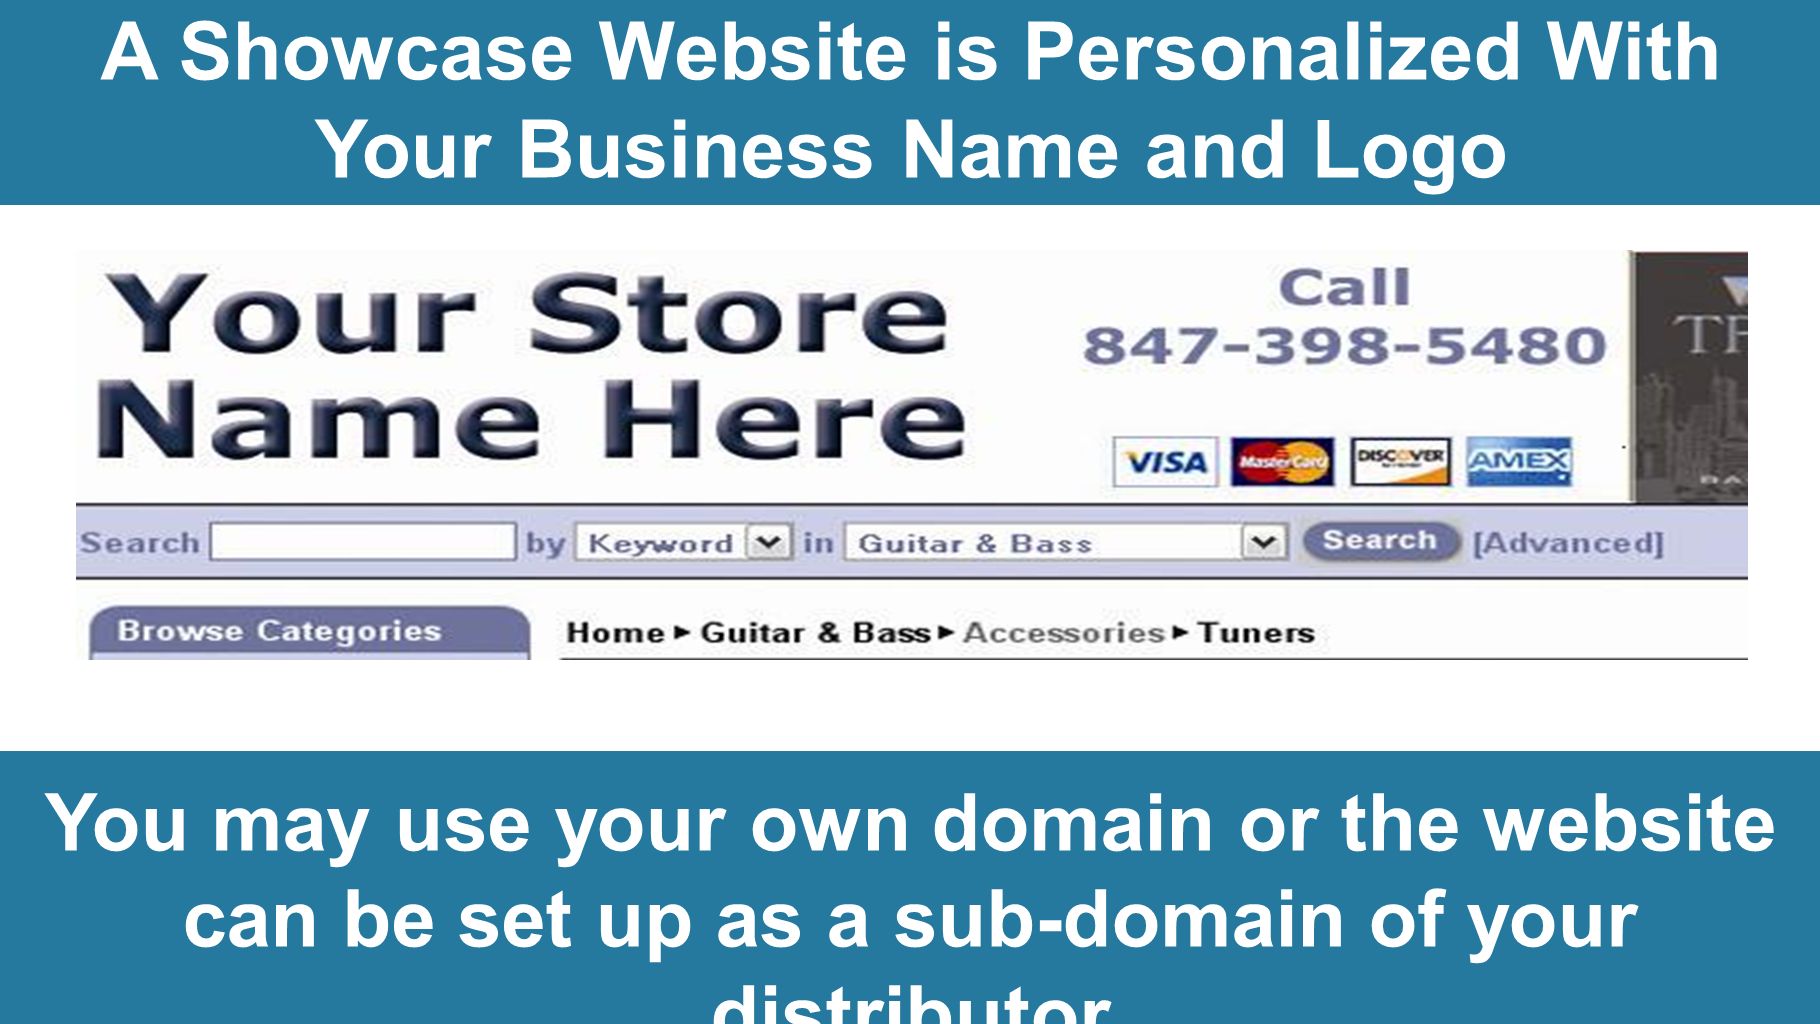 A Showcase Website is Personalized With Your Business Name and Logo You may use your own domain or the website can be set up as a sub-domain of your distributor